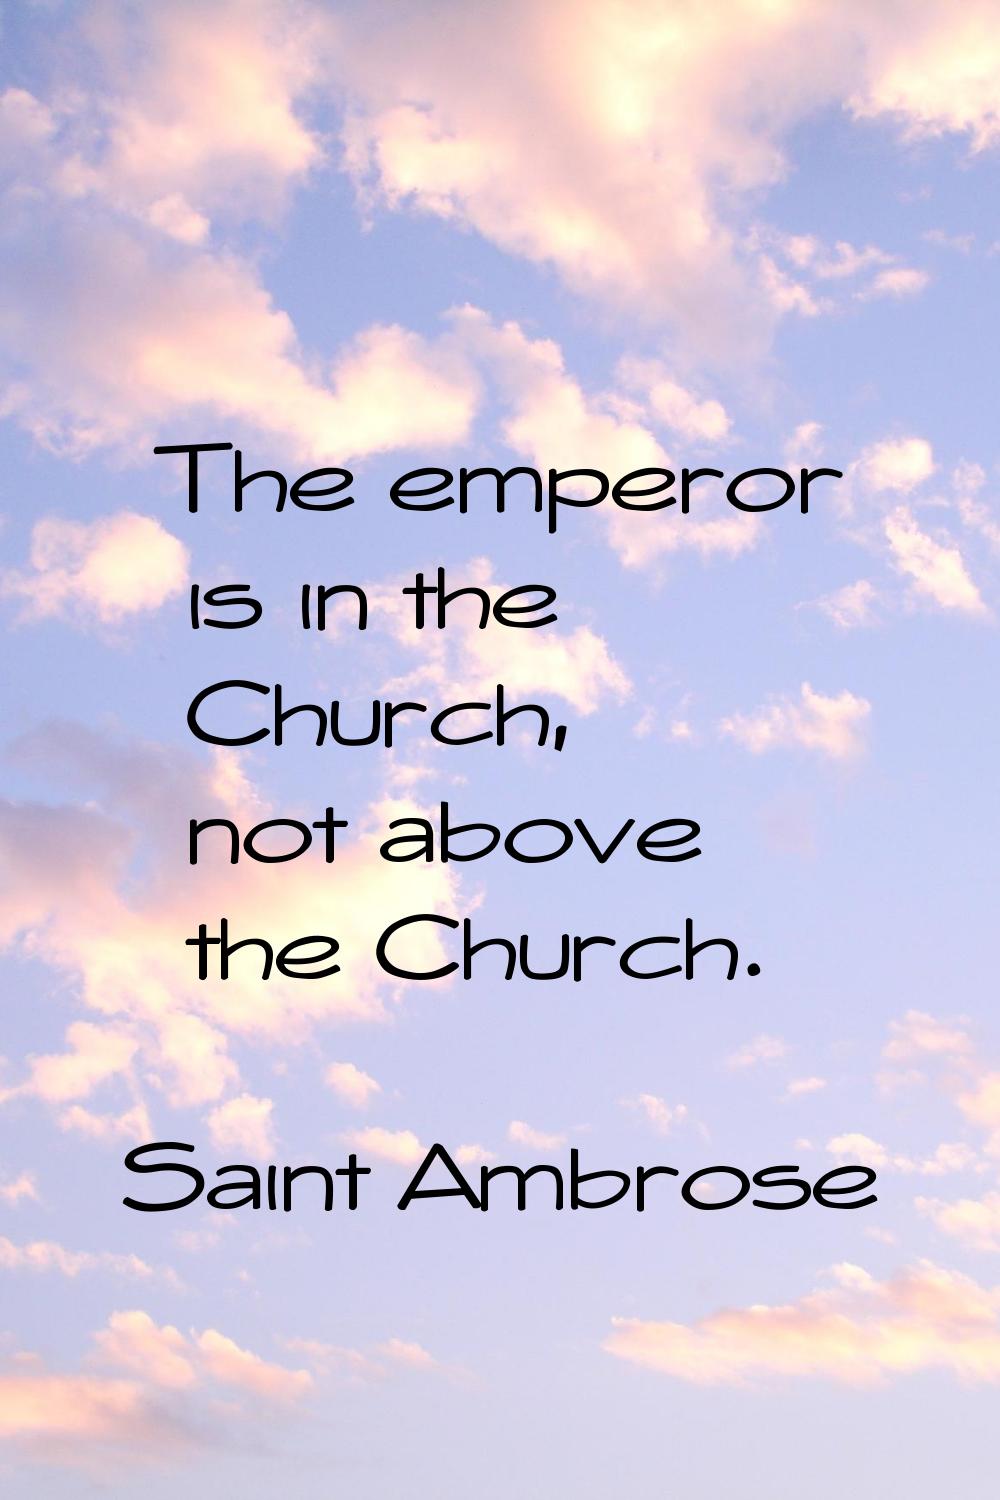 The emperor is in the Church, not above the Church.